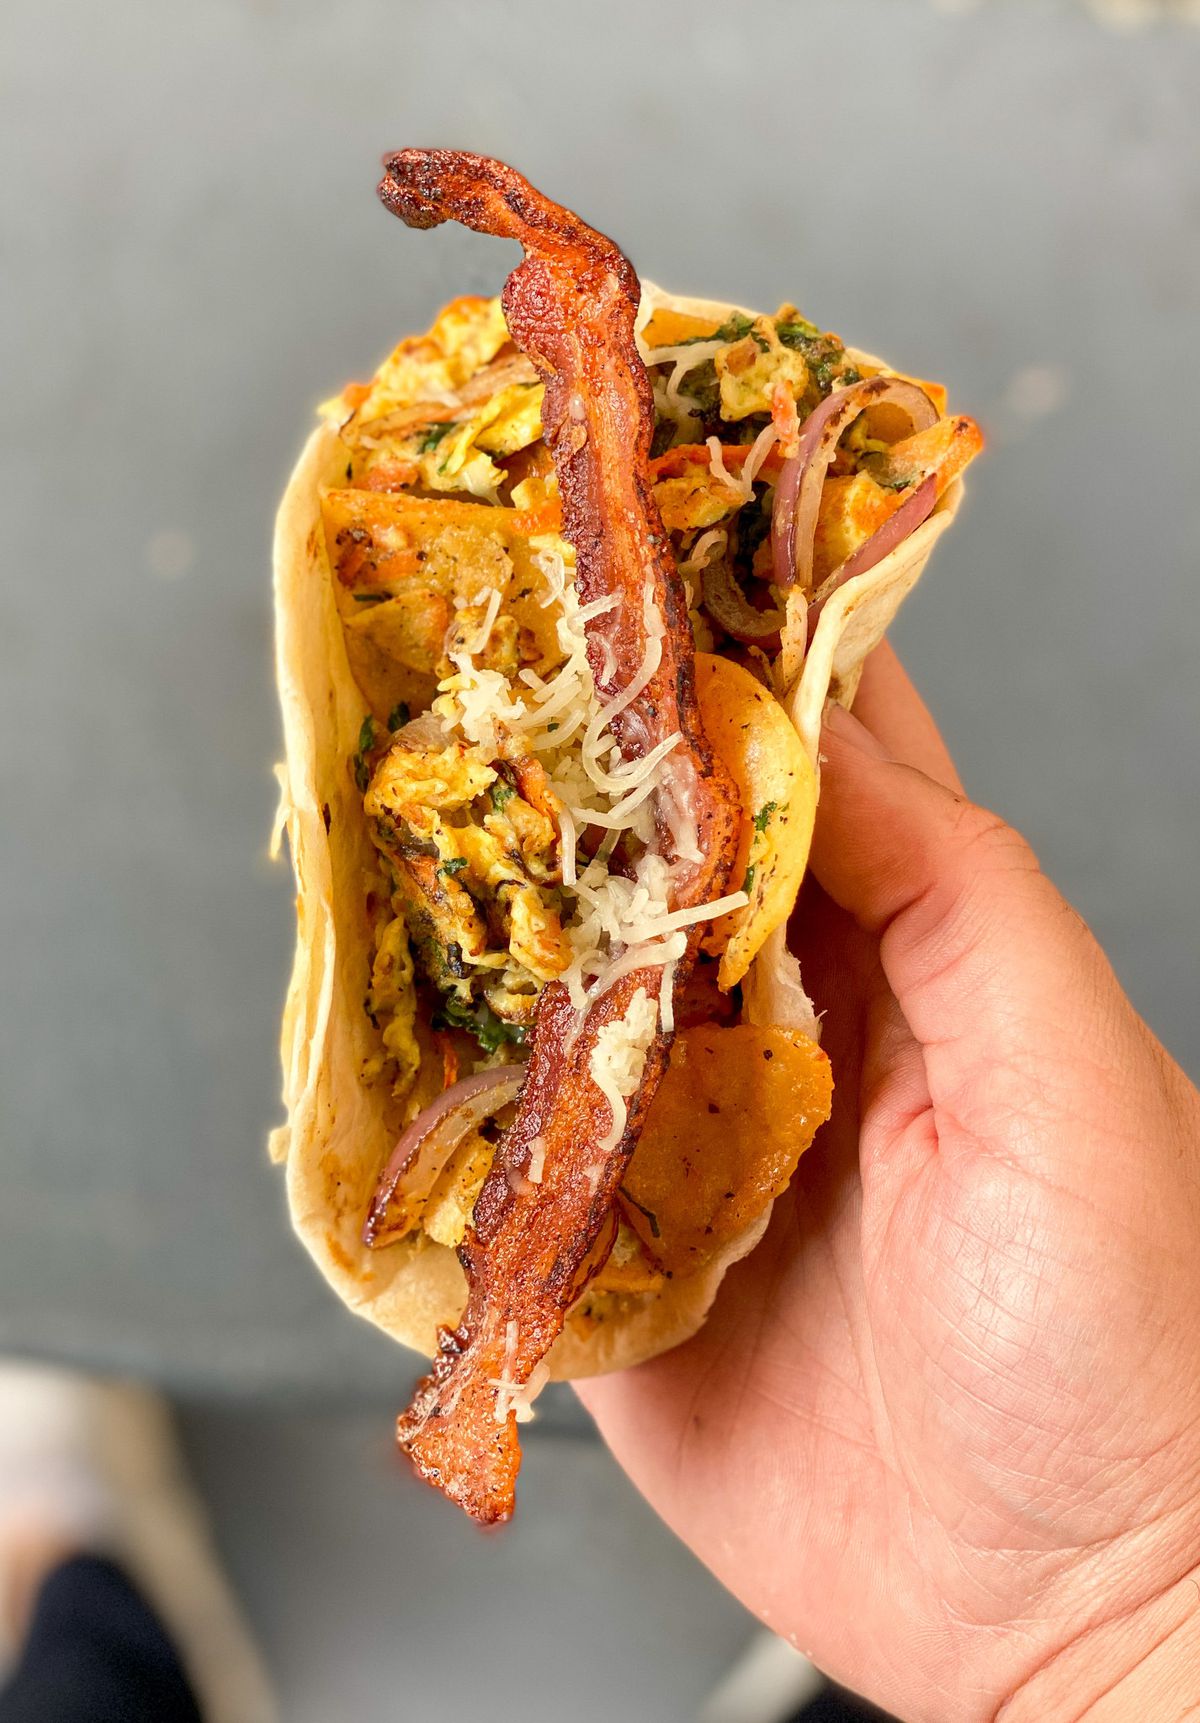 A hand holding a taco with a strip of bacon sticking out.